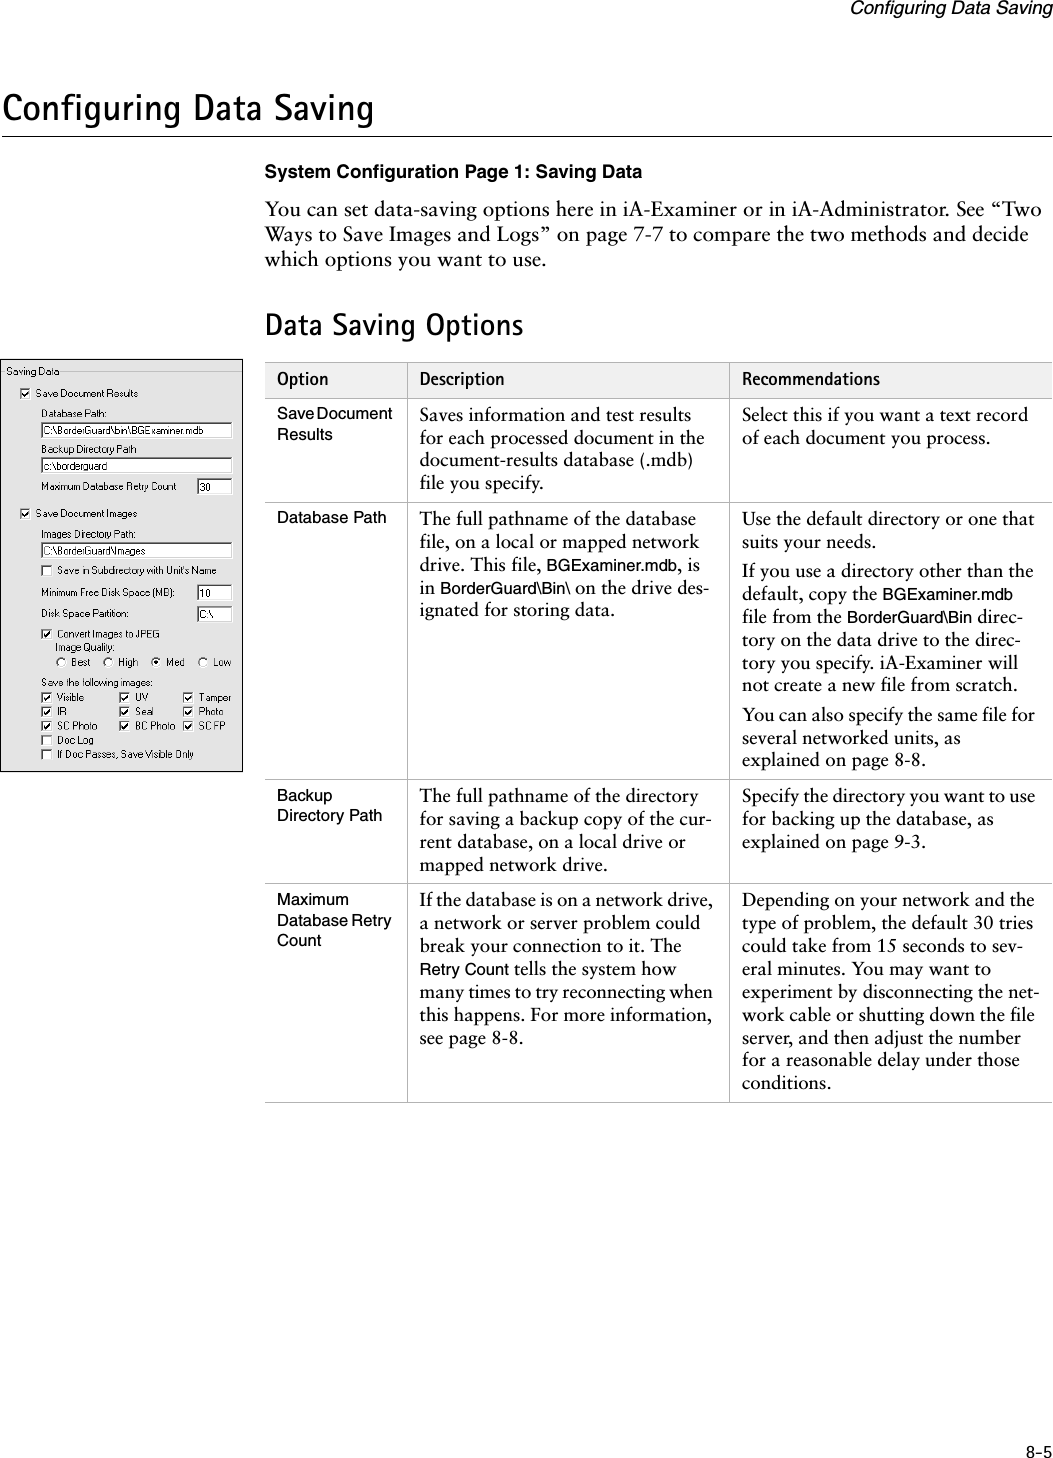 8-5Configuring Data SavingConfiguring Data SavingSystem Configuration Page 1: Saving DataYou can set data-saving options here in iA-Examiner or in iA-Administrator. See “Two Ways to Save Images and Logs” on page 7-7 to compare the two methods and decide which options you want to use.Data Saving OptionsOption Description RecommendationsSave Document ResultsSaves information and test results for each processed document in the document-results database (.mdb) file you specify.Select this if you want a text record of each document you process.Database Path The full pathname of the database file, on a local or mapped network drive. This file, BGExaminer.mdb, is in BorderGuard\Bin\ on the drive des-ignated for storing data.Use the default directory or one that suits your needs.If you use a directory other than the default, copy the BGExaminer.mdb file from the BorderGuard\Bin direc-tory on the data drive to the direc-tory you specify. iA-Examiner will not create a new file from scratch.You can also specify the same file for several networked units, as explained on page 8-8.Backup Directory PathThe full pathname of the directory for saving a backup copy of the cur-rent database, on a local drive or mapped network drive.Specify the directory you want to use for backing up the database, as explained on page 9-3.Maximum Database Retry CountIf the database is on a network drive, a network or server problem could break your connection to it. The Retry Count tells the system how many times to try reconnecting when this happens. For more information, see page 8-8.Depending on your network and the type of problem, the default 30 tries could take from 15 seconds to sev-eral minutes. You may want to experiment by disconnecting the net-work cable or shutting down the file server, and then adjust the number for a reasonable delay under those conditions.